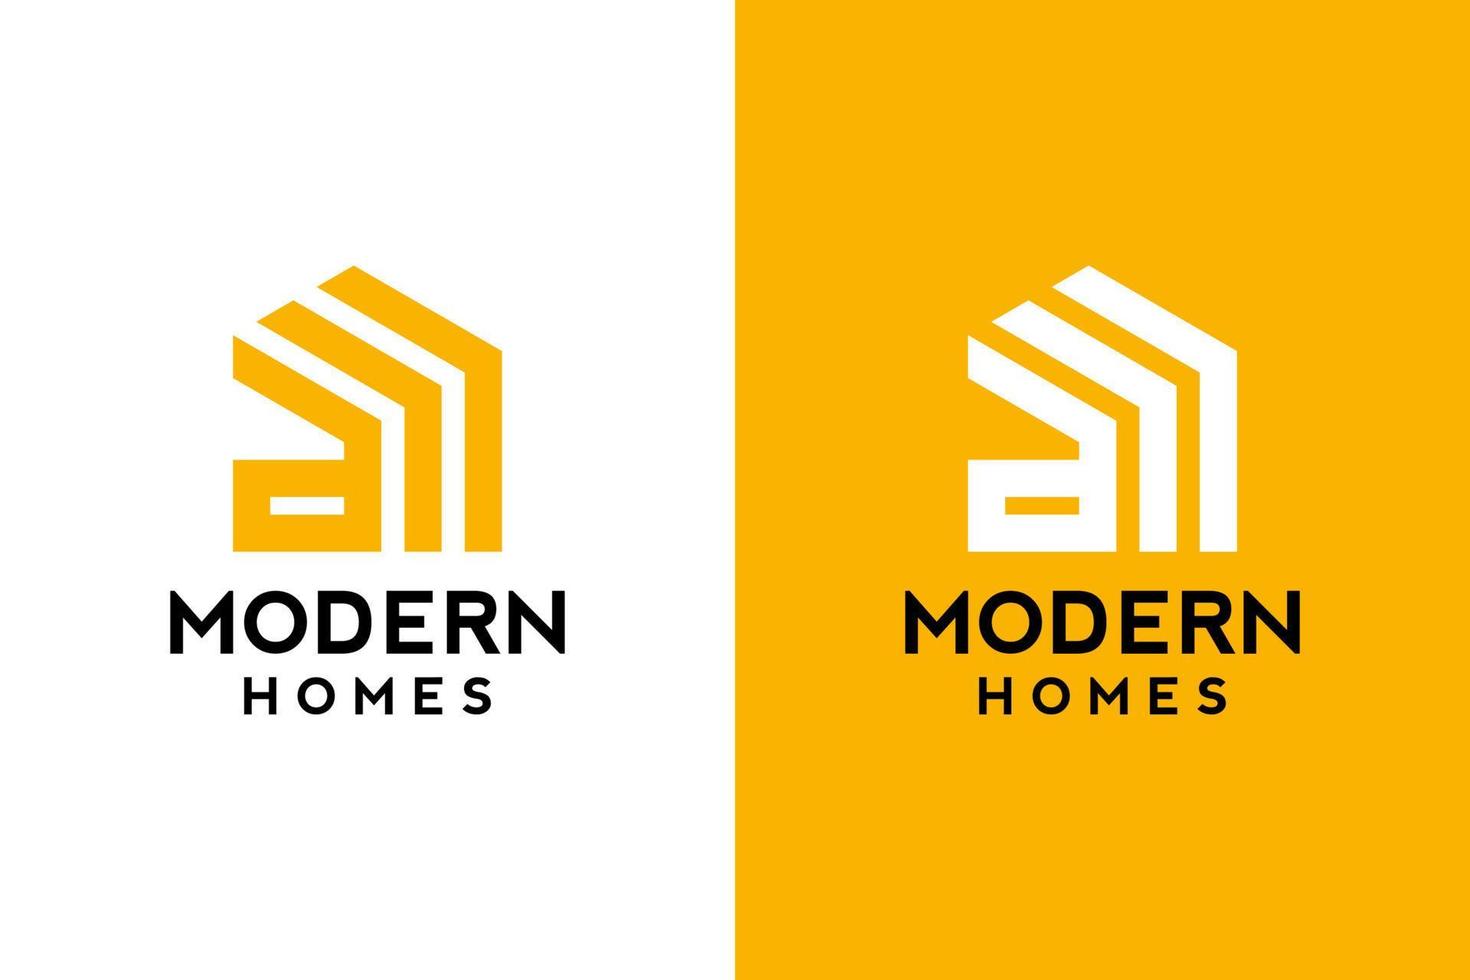 Logo design of D in vector for construction, home, real estate, building, property. Minimal awesome trendy professional logo design template on double background.